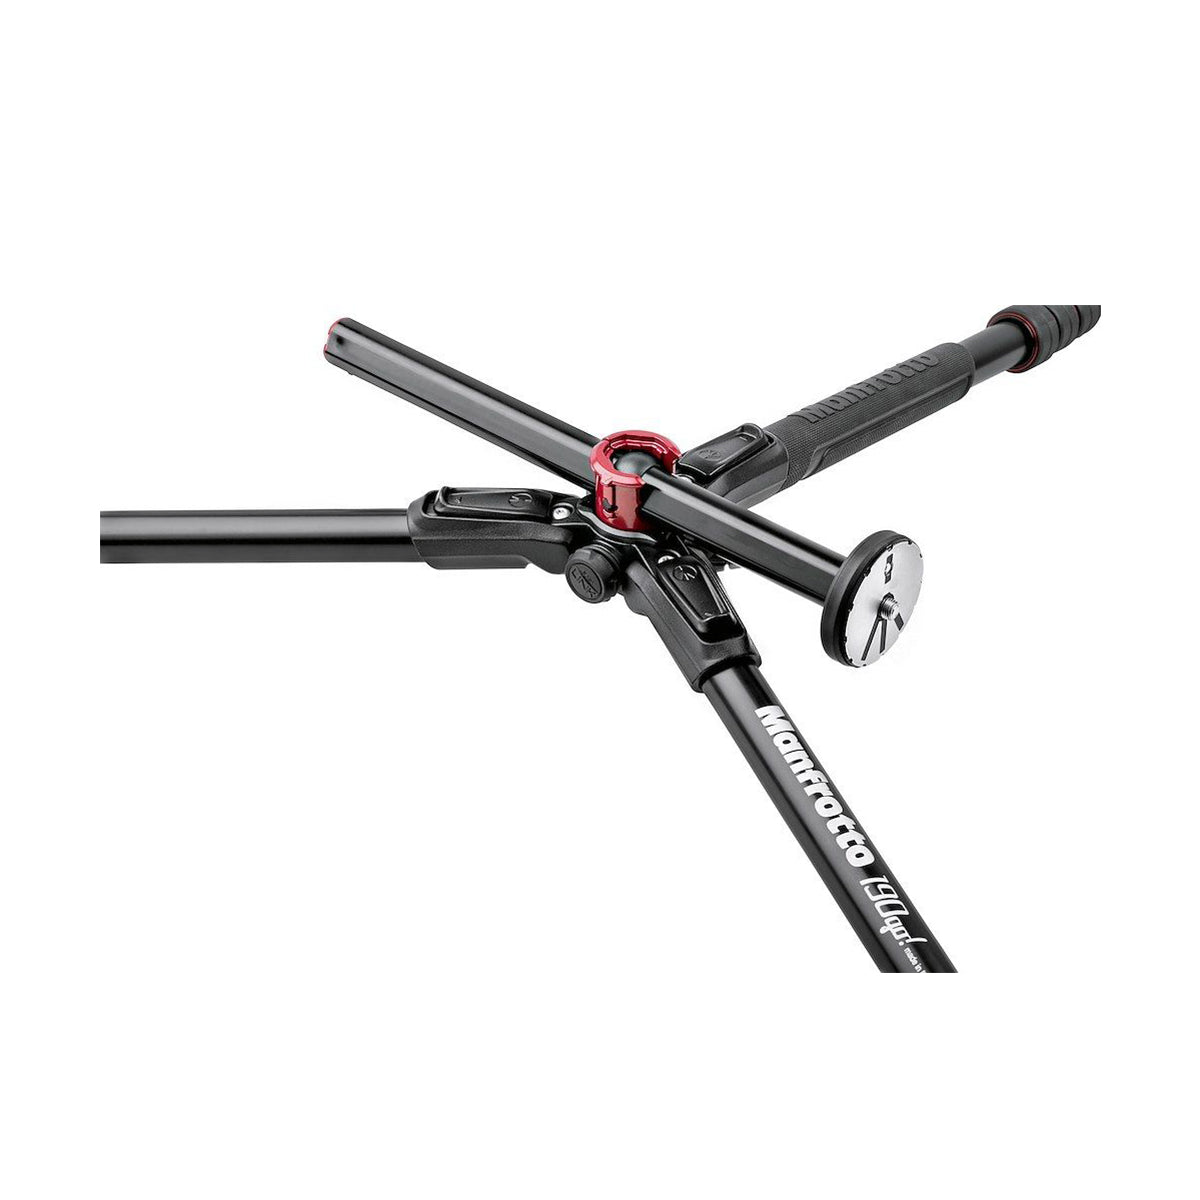 Manfrotto 190go! Aluminum 4 Section Tripod with Ball Head